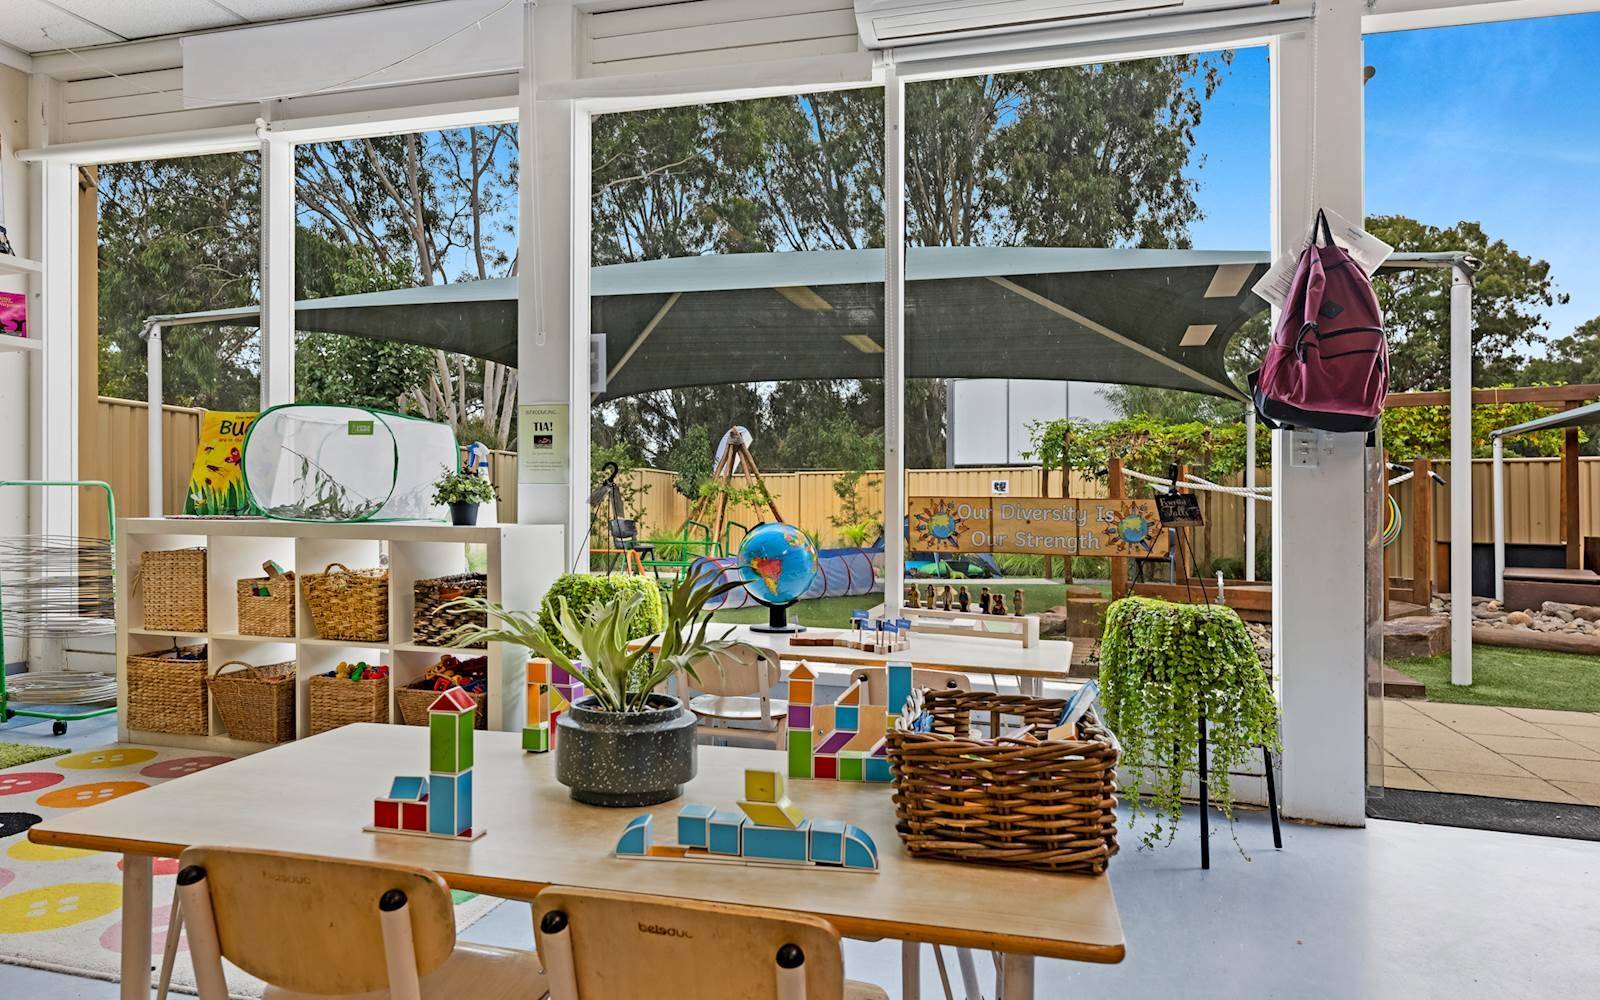 Grow Early Education Templestowe - temporarily closed for major renovations